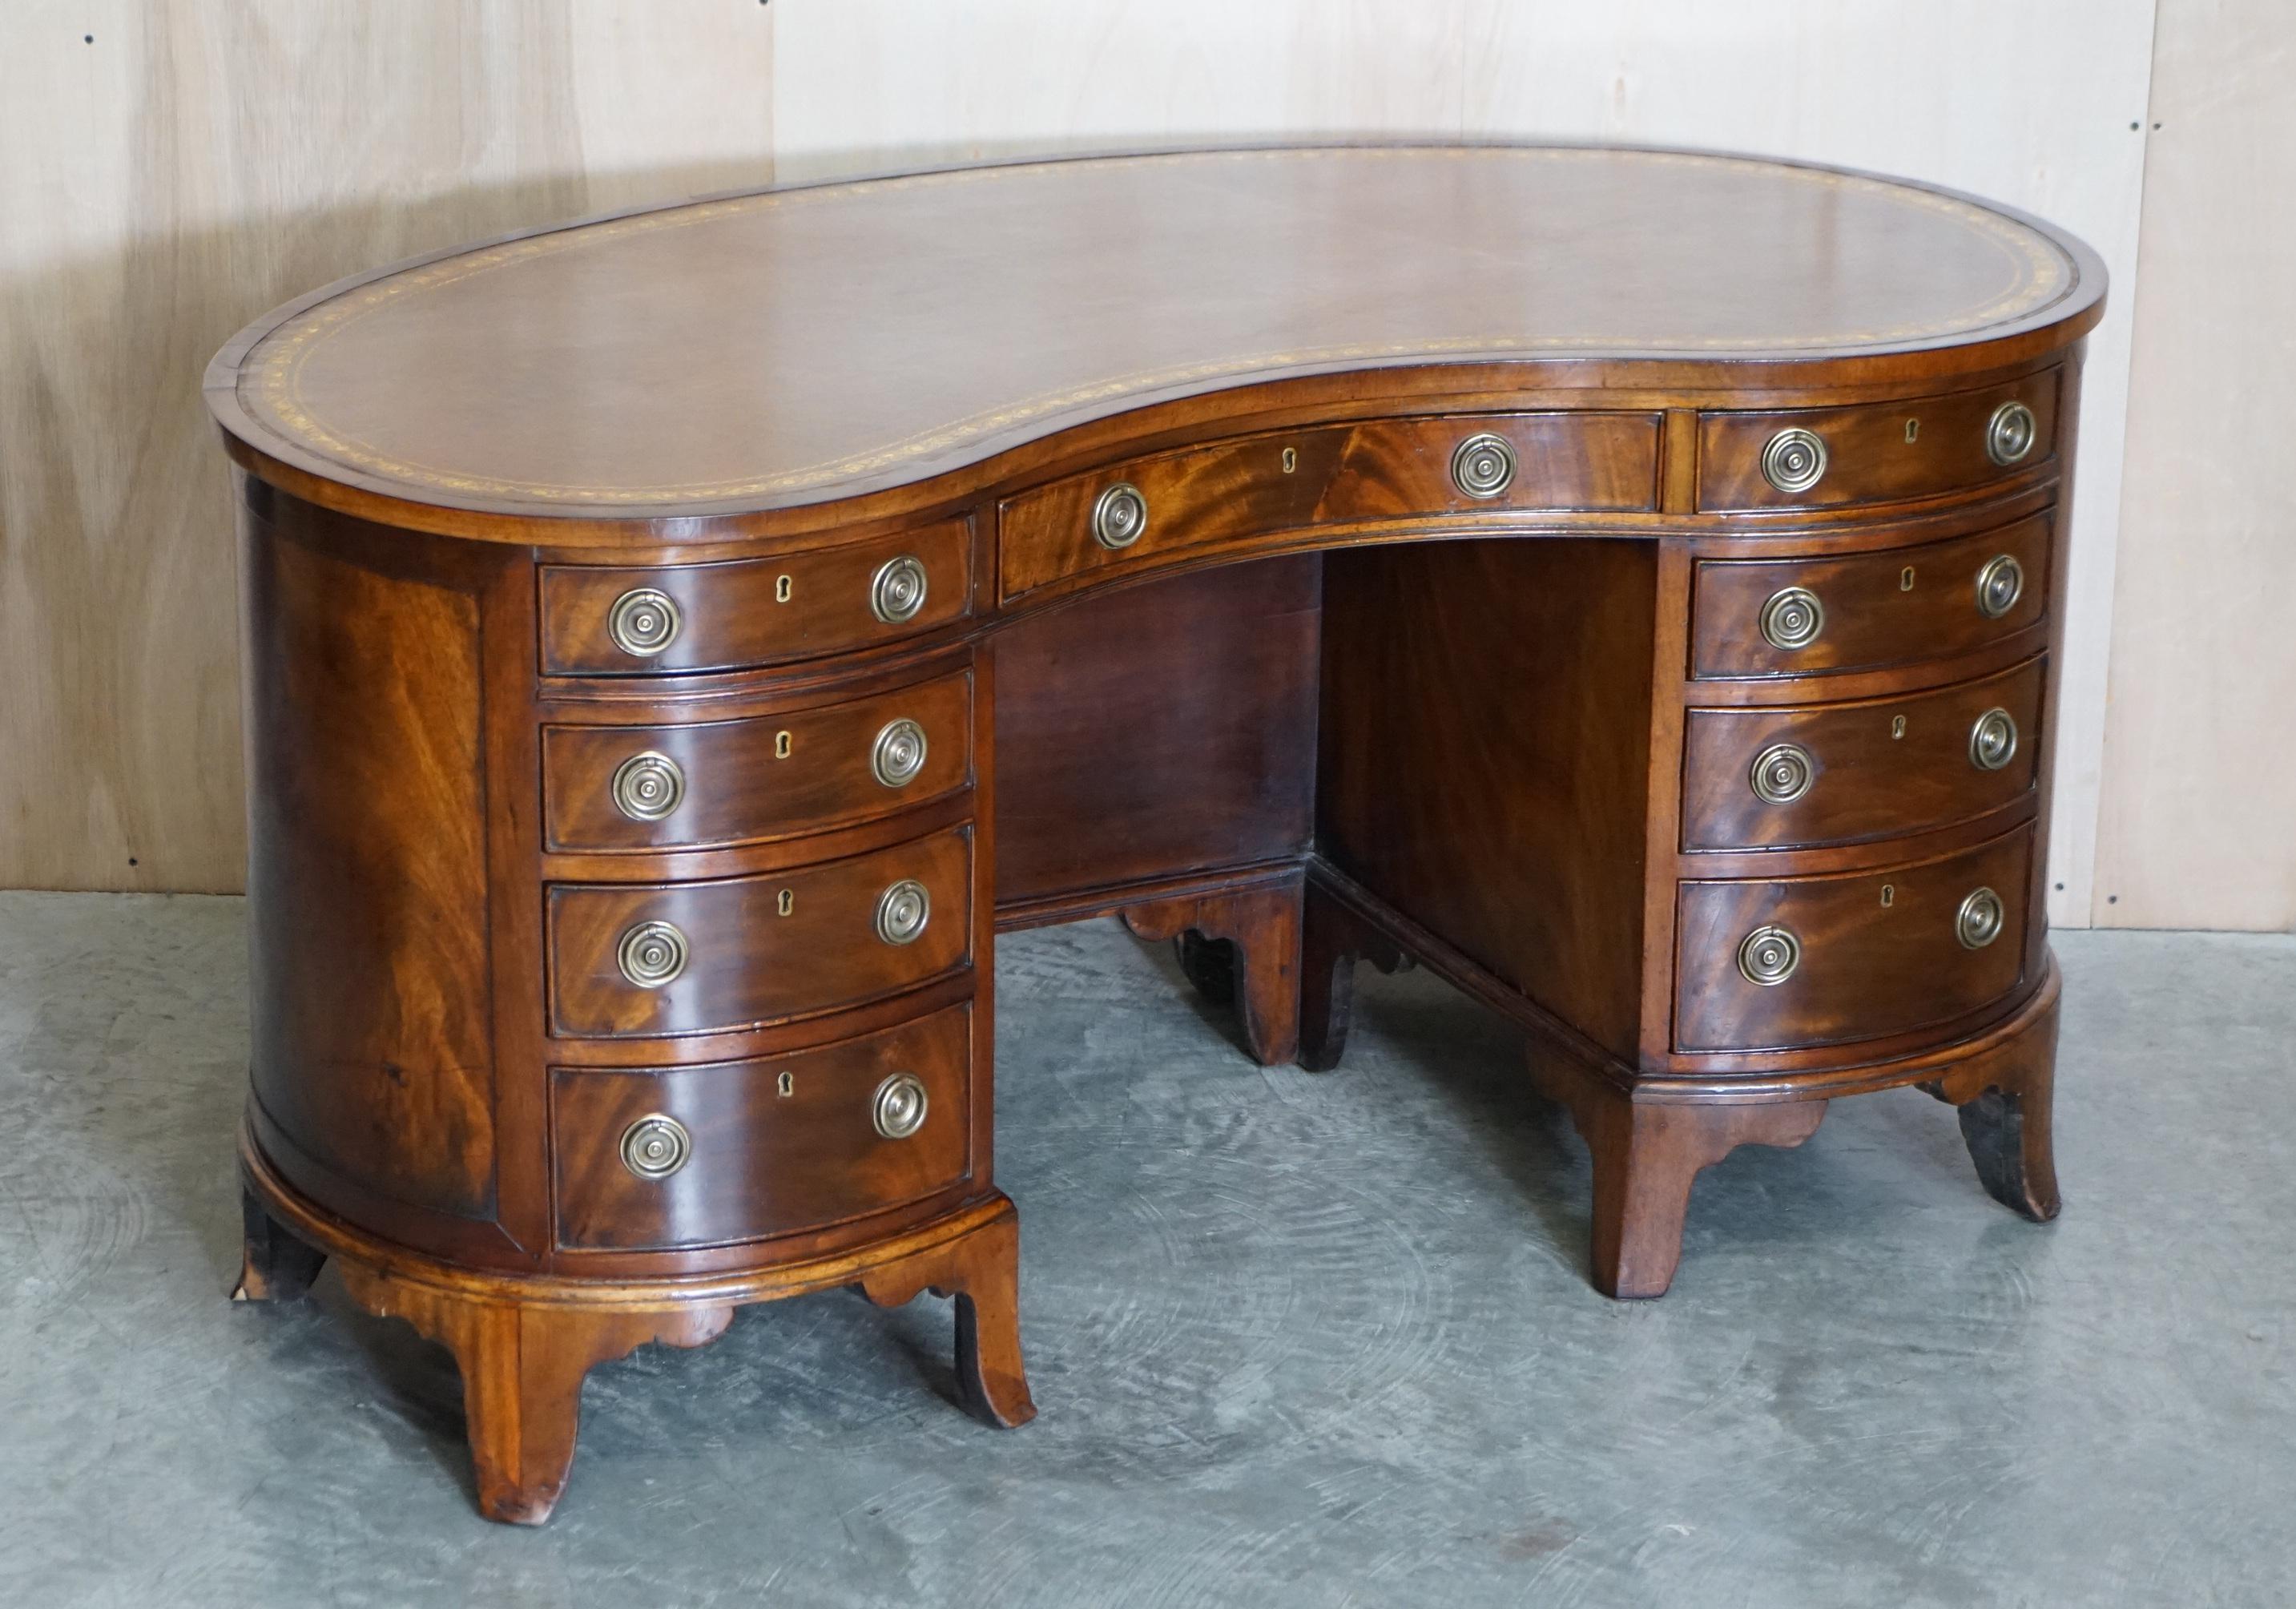 We are delighted to offer for sale this Important, fully restored, bookcase back kidney desk attributed to Gillow’s of Lancaster.

This is one of the finest desks I have ever owned, the design was originally made by Gillows of Lancaster, you can